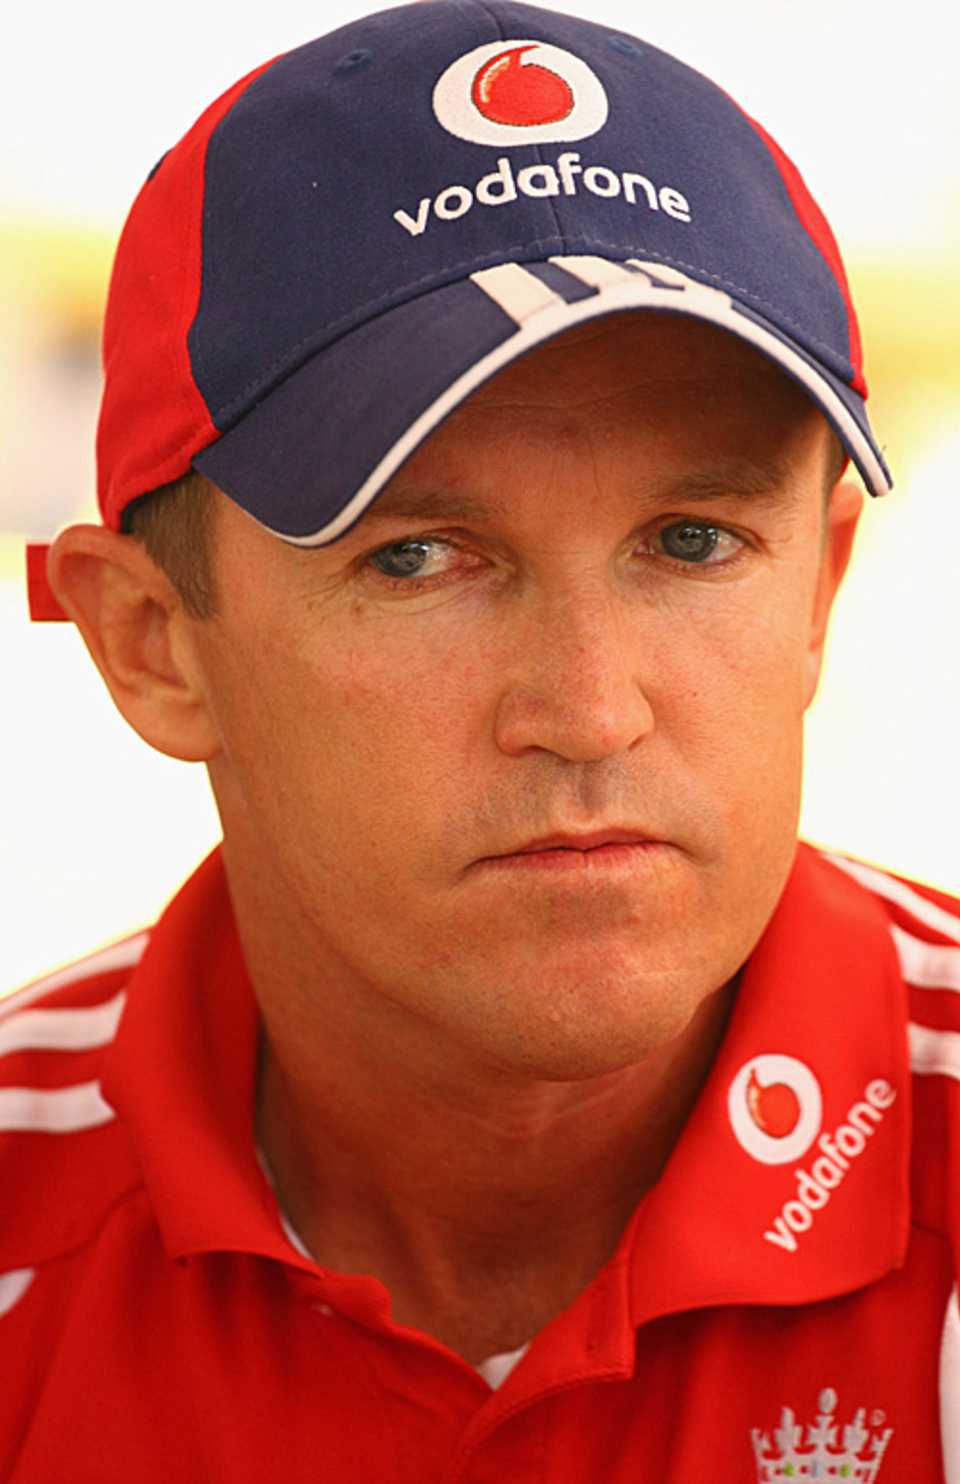 An under-fire Andy Flower at the England press conference, a day after England were bowled out for 51, West Indies v England, 1st Test, Kingston, February 8, 2009